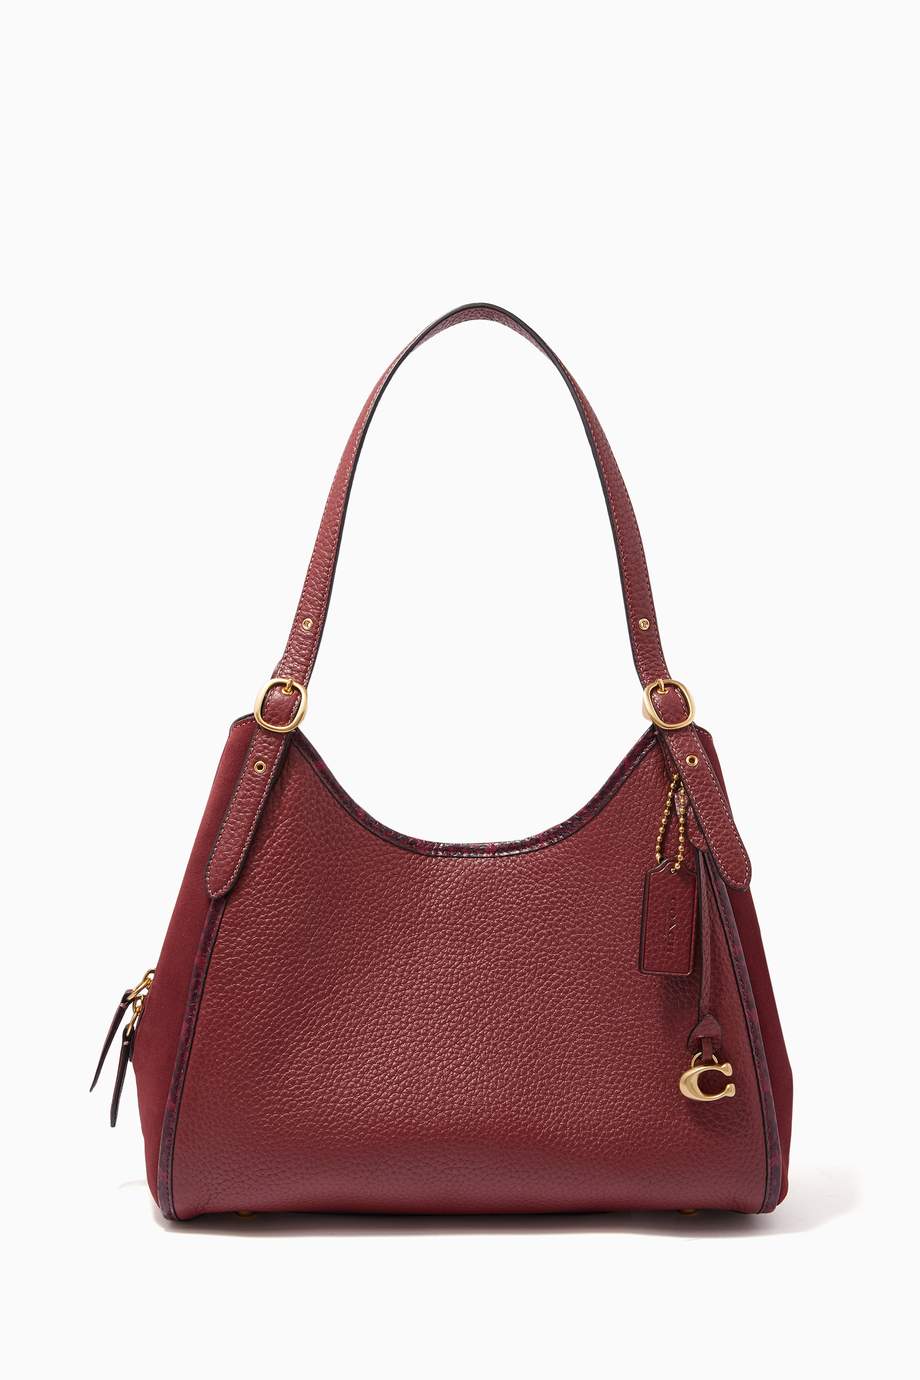 Shop Coach Red Lori Shoulder Bag with Snakeskin Detail for Women ...